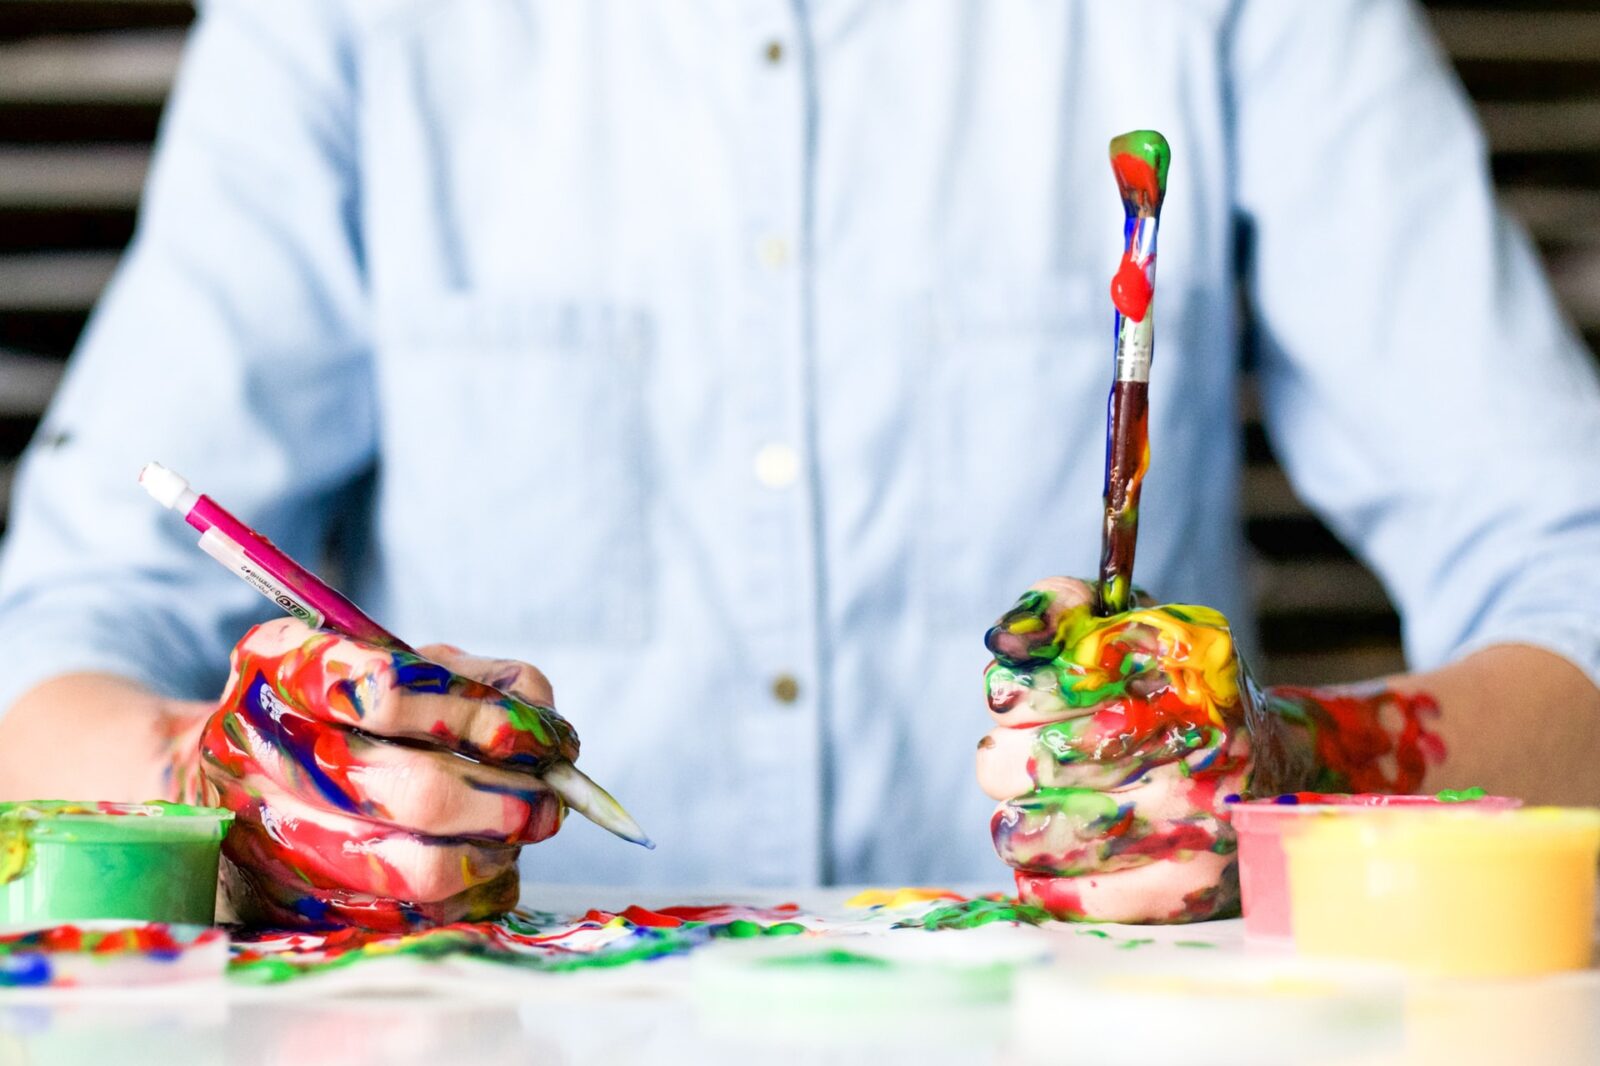 What creativity can be defined as in today’s world?